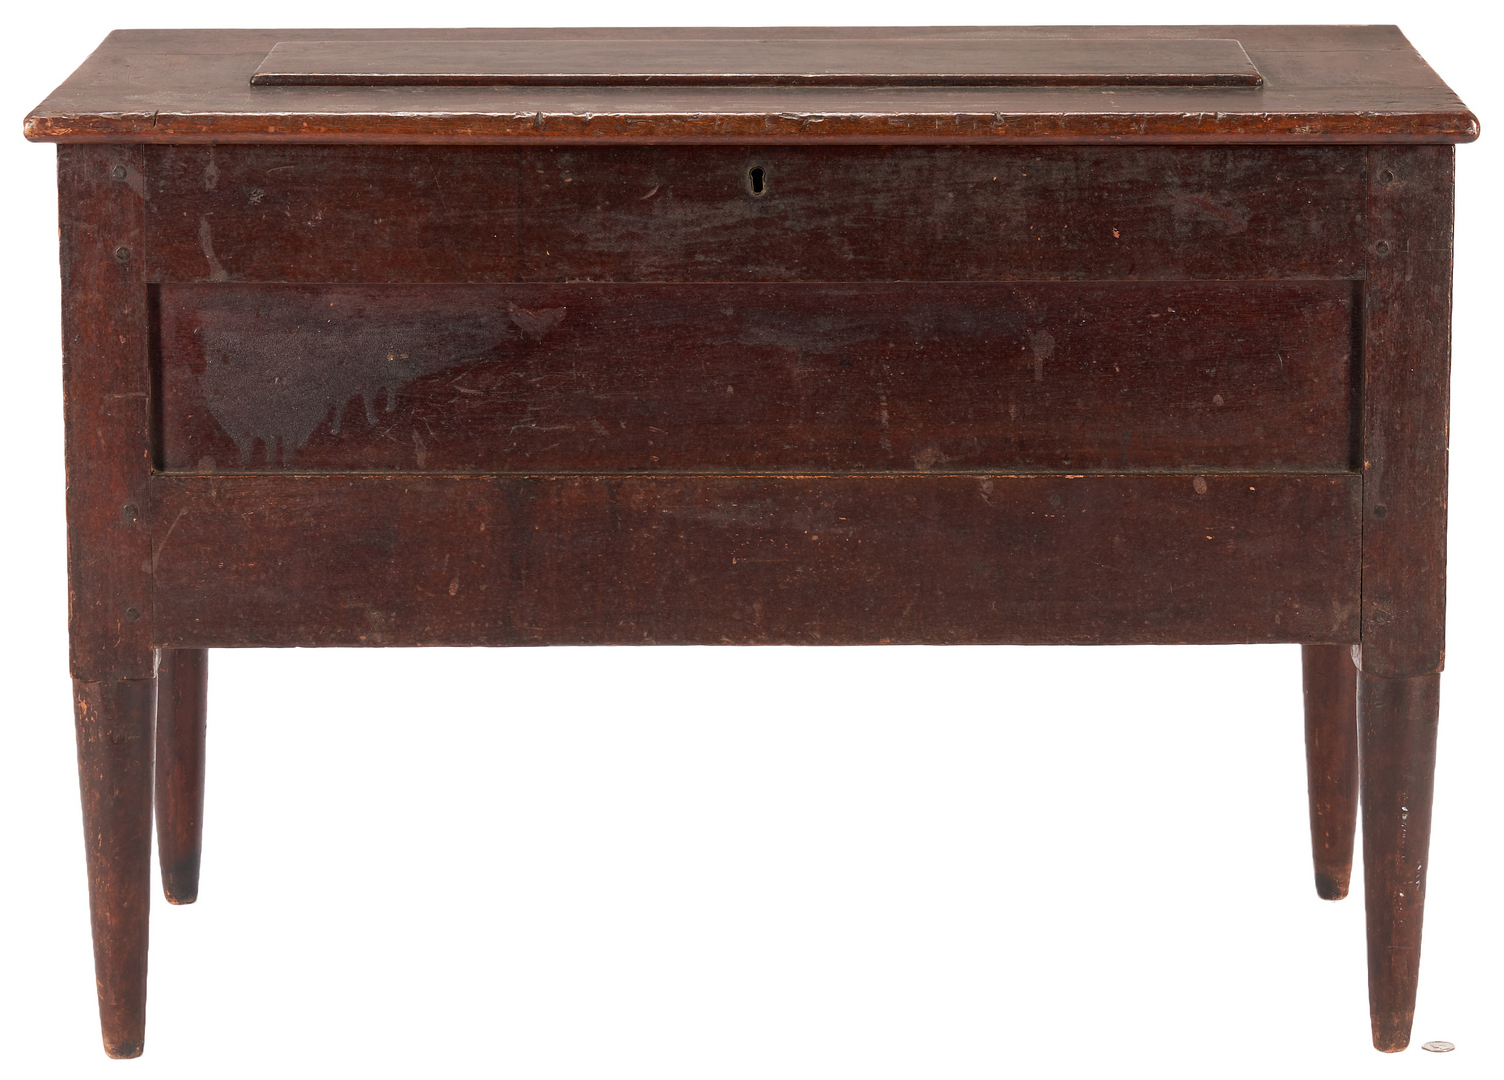 Lot 129: Southern Walnut Blanket Chest on Tall Tapered Legs, Old Surface